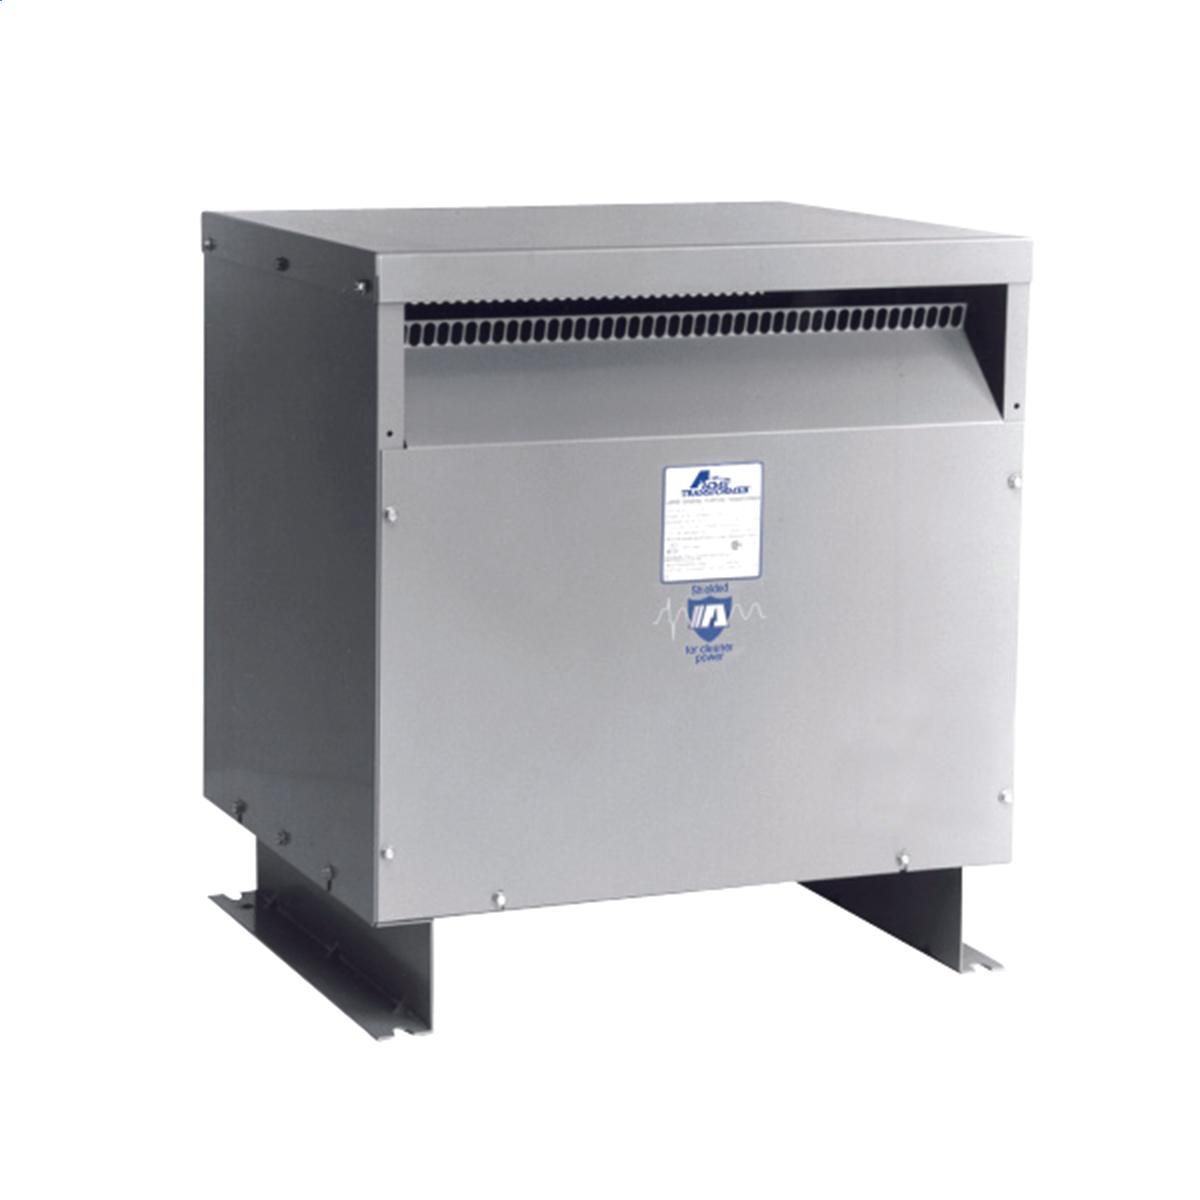 Hubbell WB015K02 Medium Voltage Transformer - Single Phase, 2400 - 240/480V, 15kVA  ; Lower operating cost over Liquid-filled ; No additional fireproofing or venting ; Long life expectancy ; Smaller, lighter easy to maintain